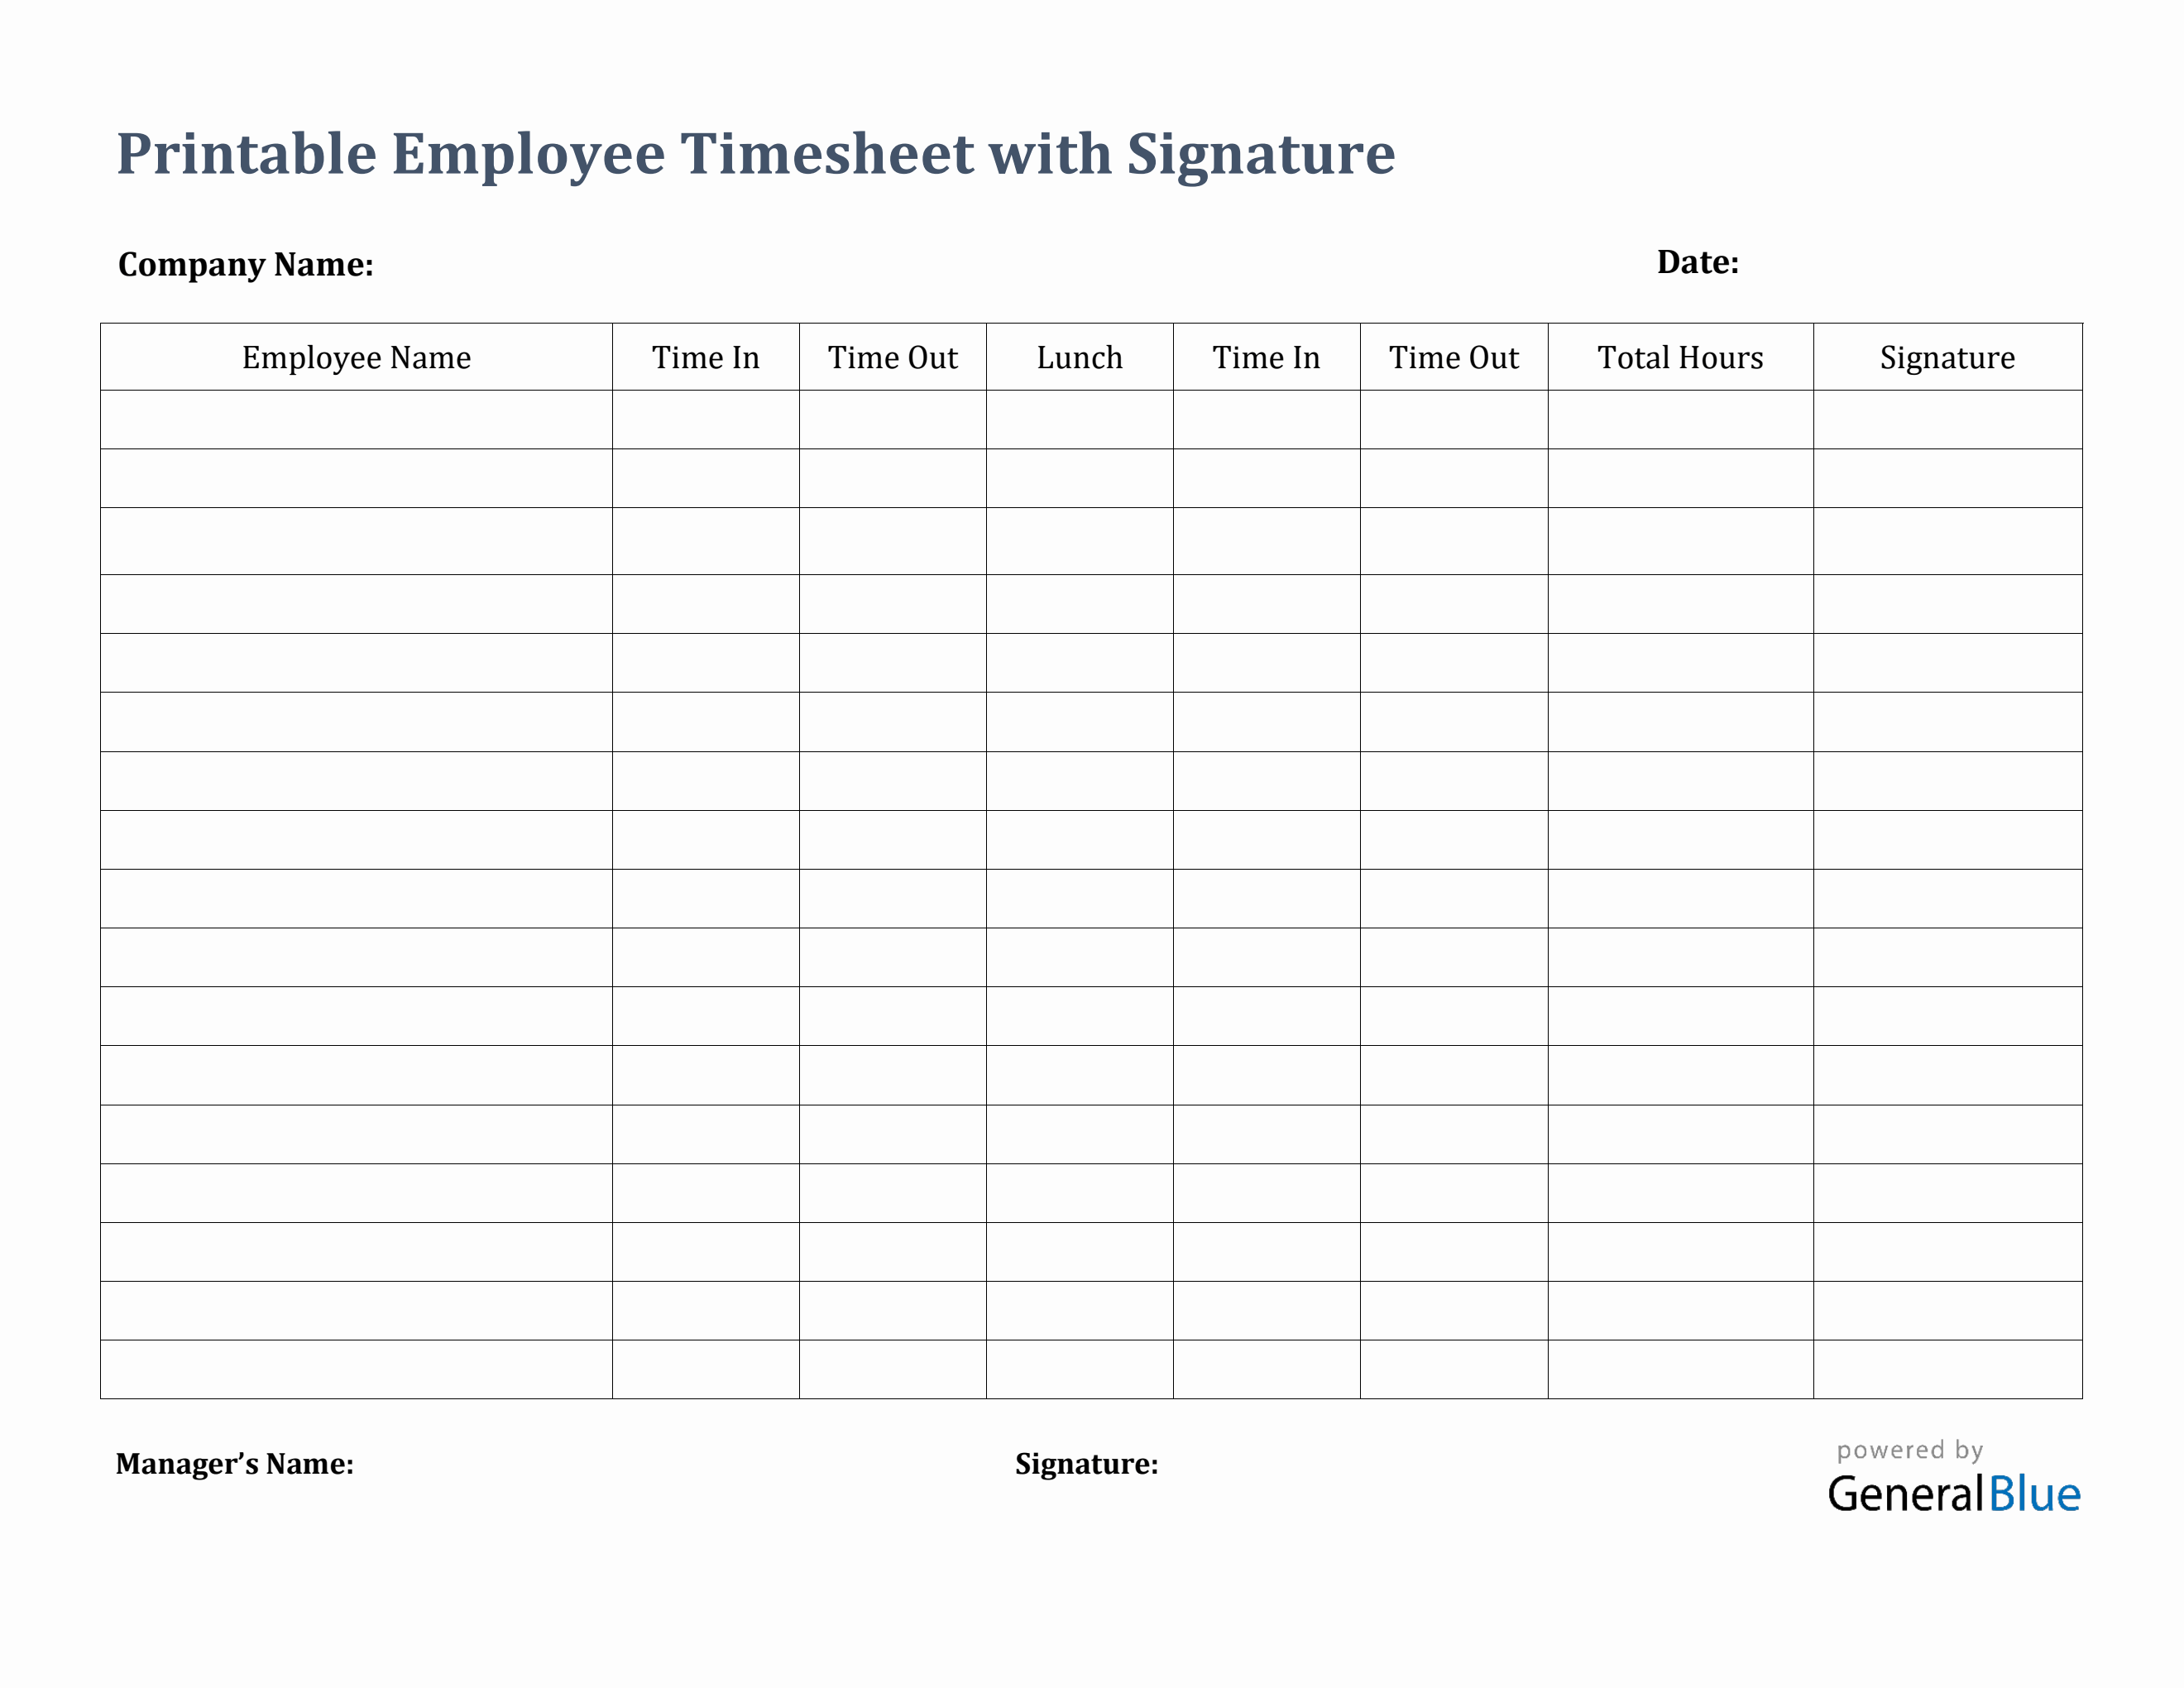 employee-time-sheets-printable-printable-form-templates-and-letter